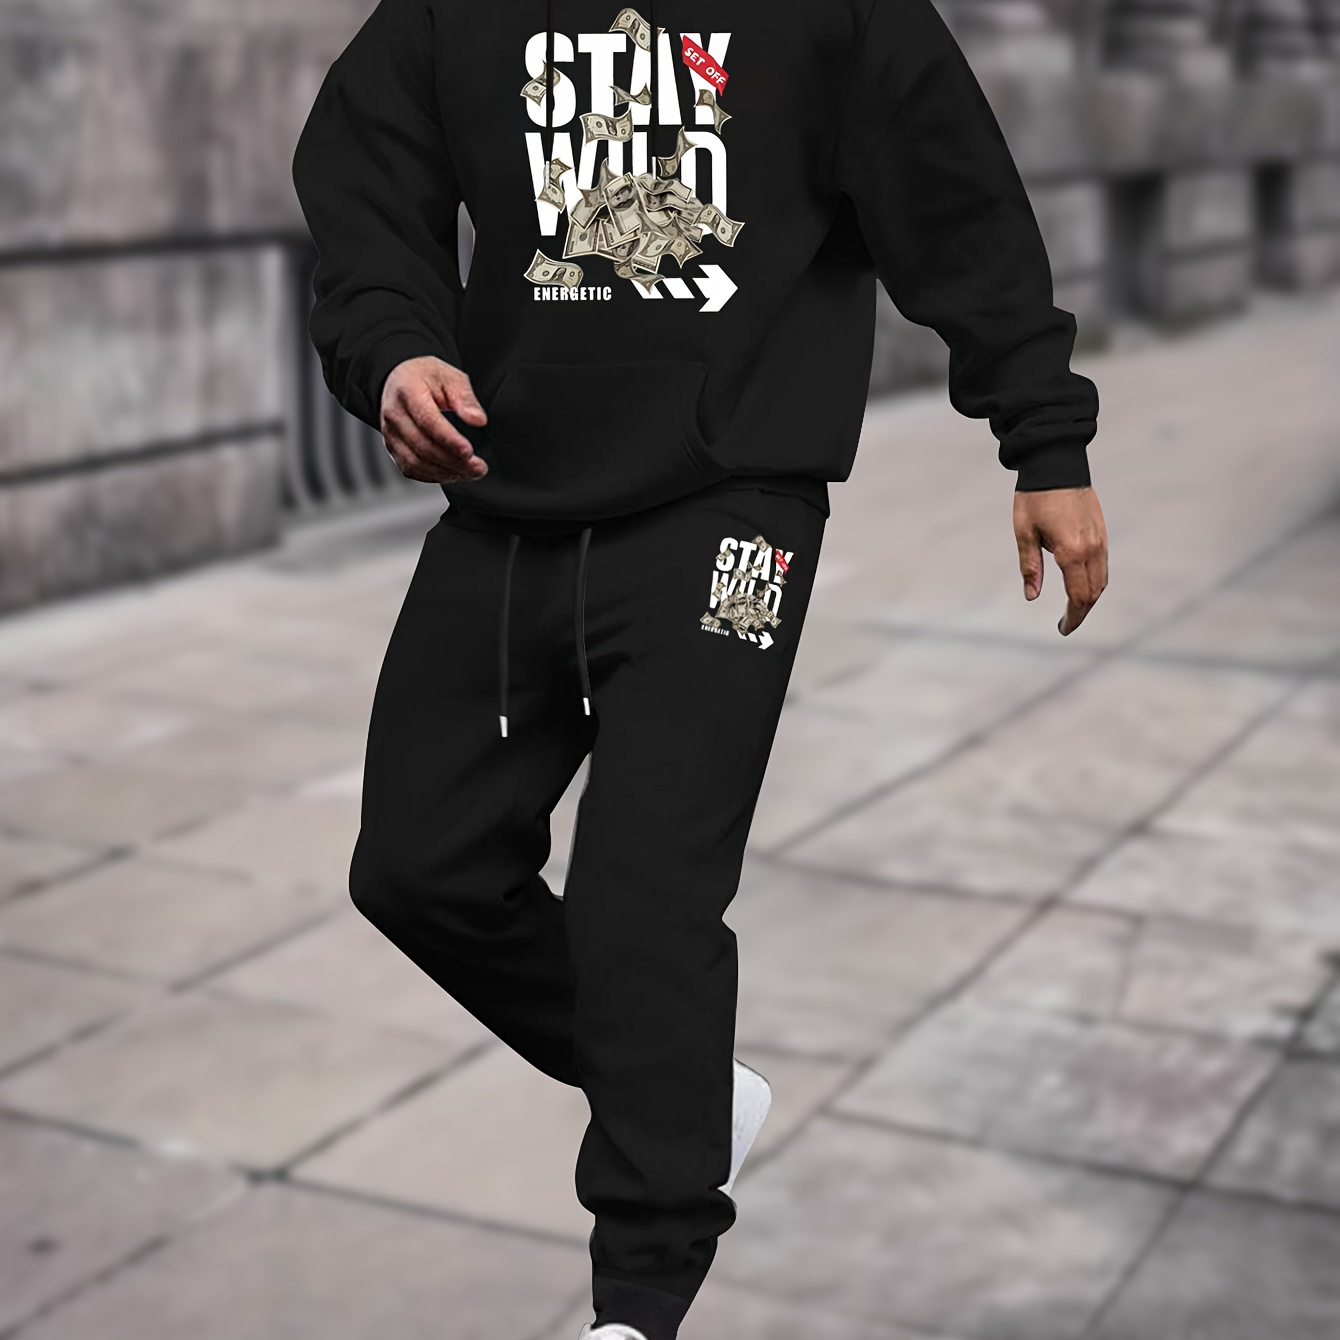 

Stay Wild And Cash Graphic Print, Men's 2pcs Outfits, Casual Crew Neck Long Sleeve Pullover Hoodie And Drawstring Sweatpants Joggers Set For Spring And Fall, Men's Clothing